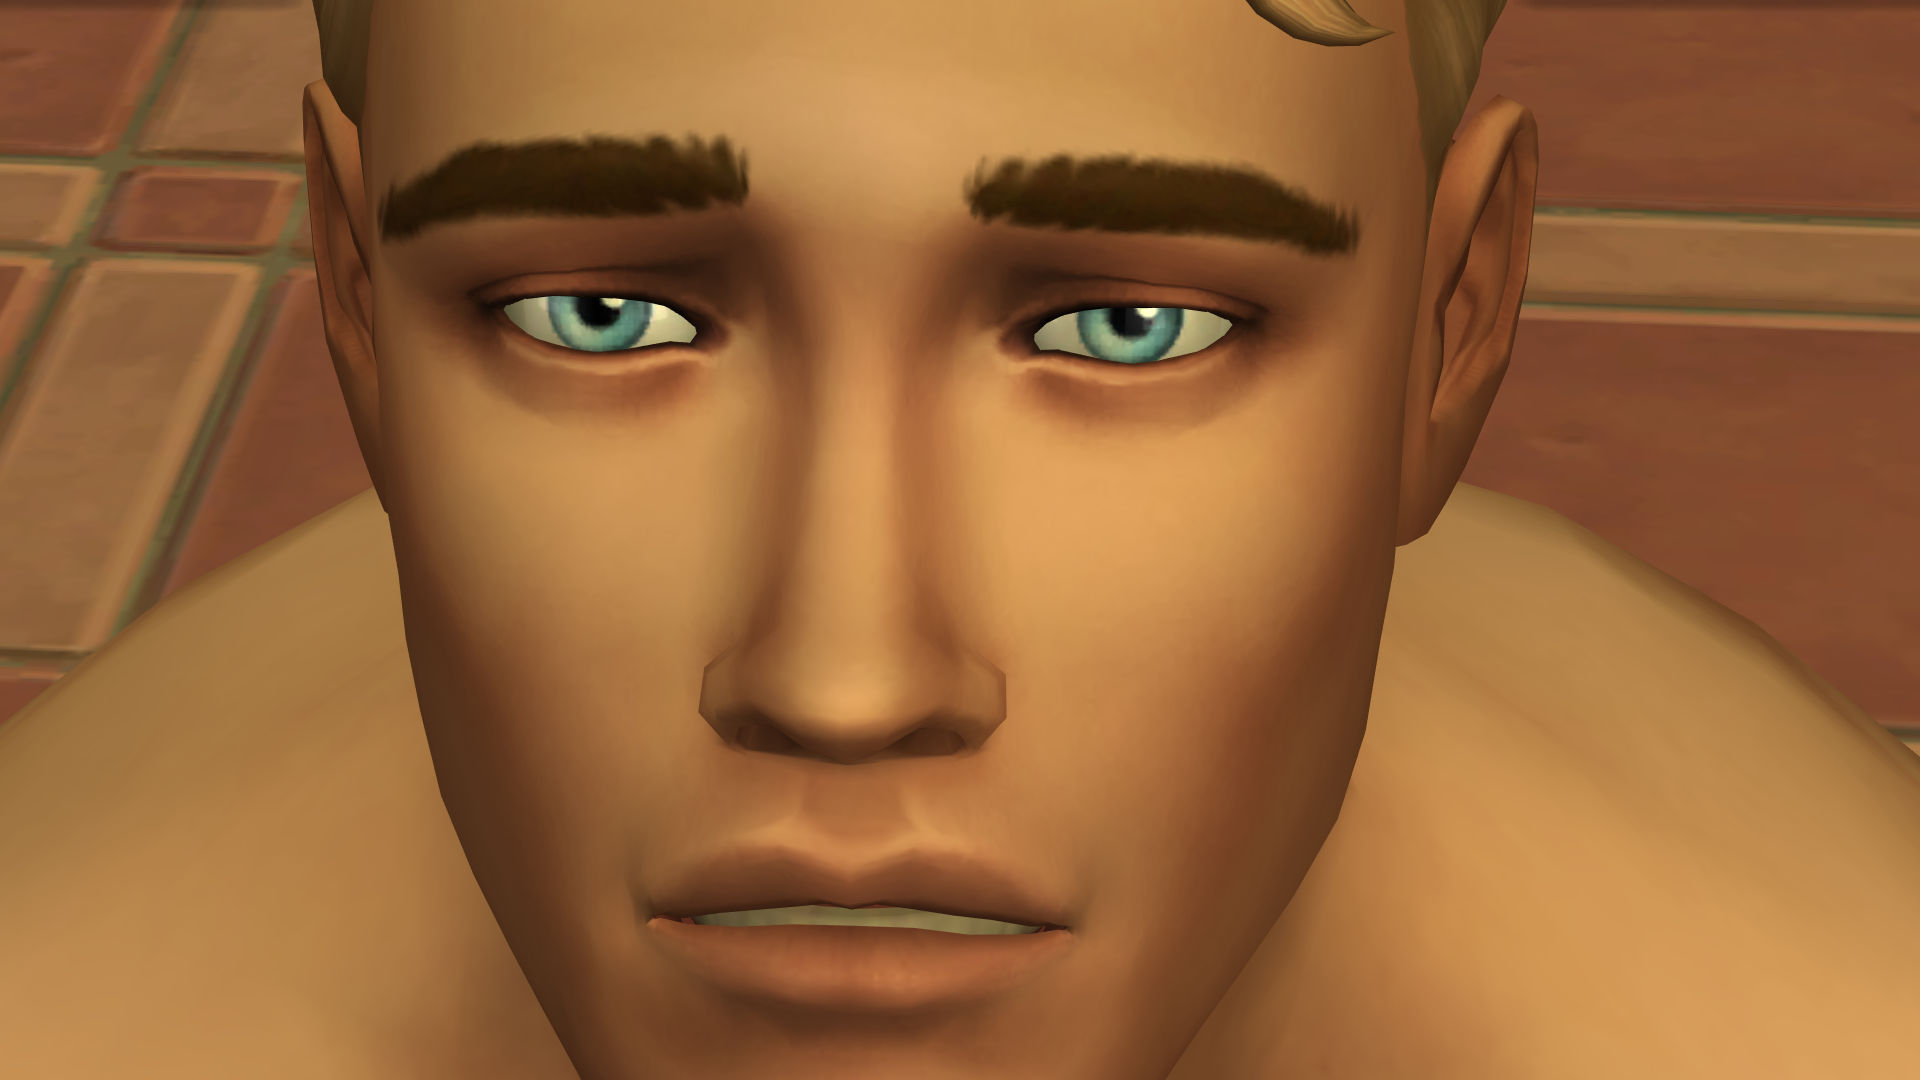 Share Your Male Sims Page The Sims General Discussion Loverslab